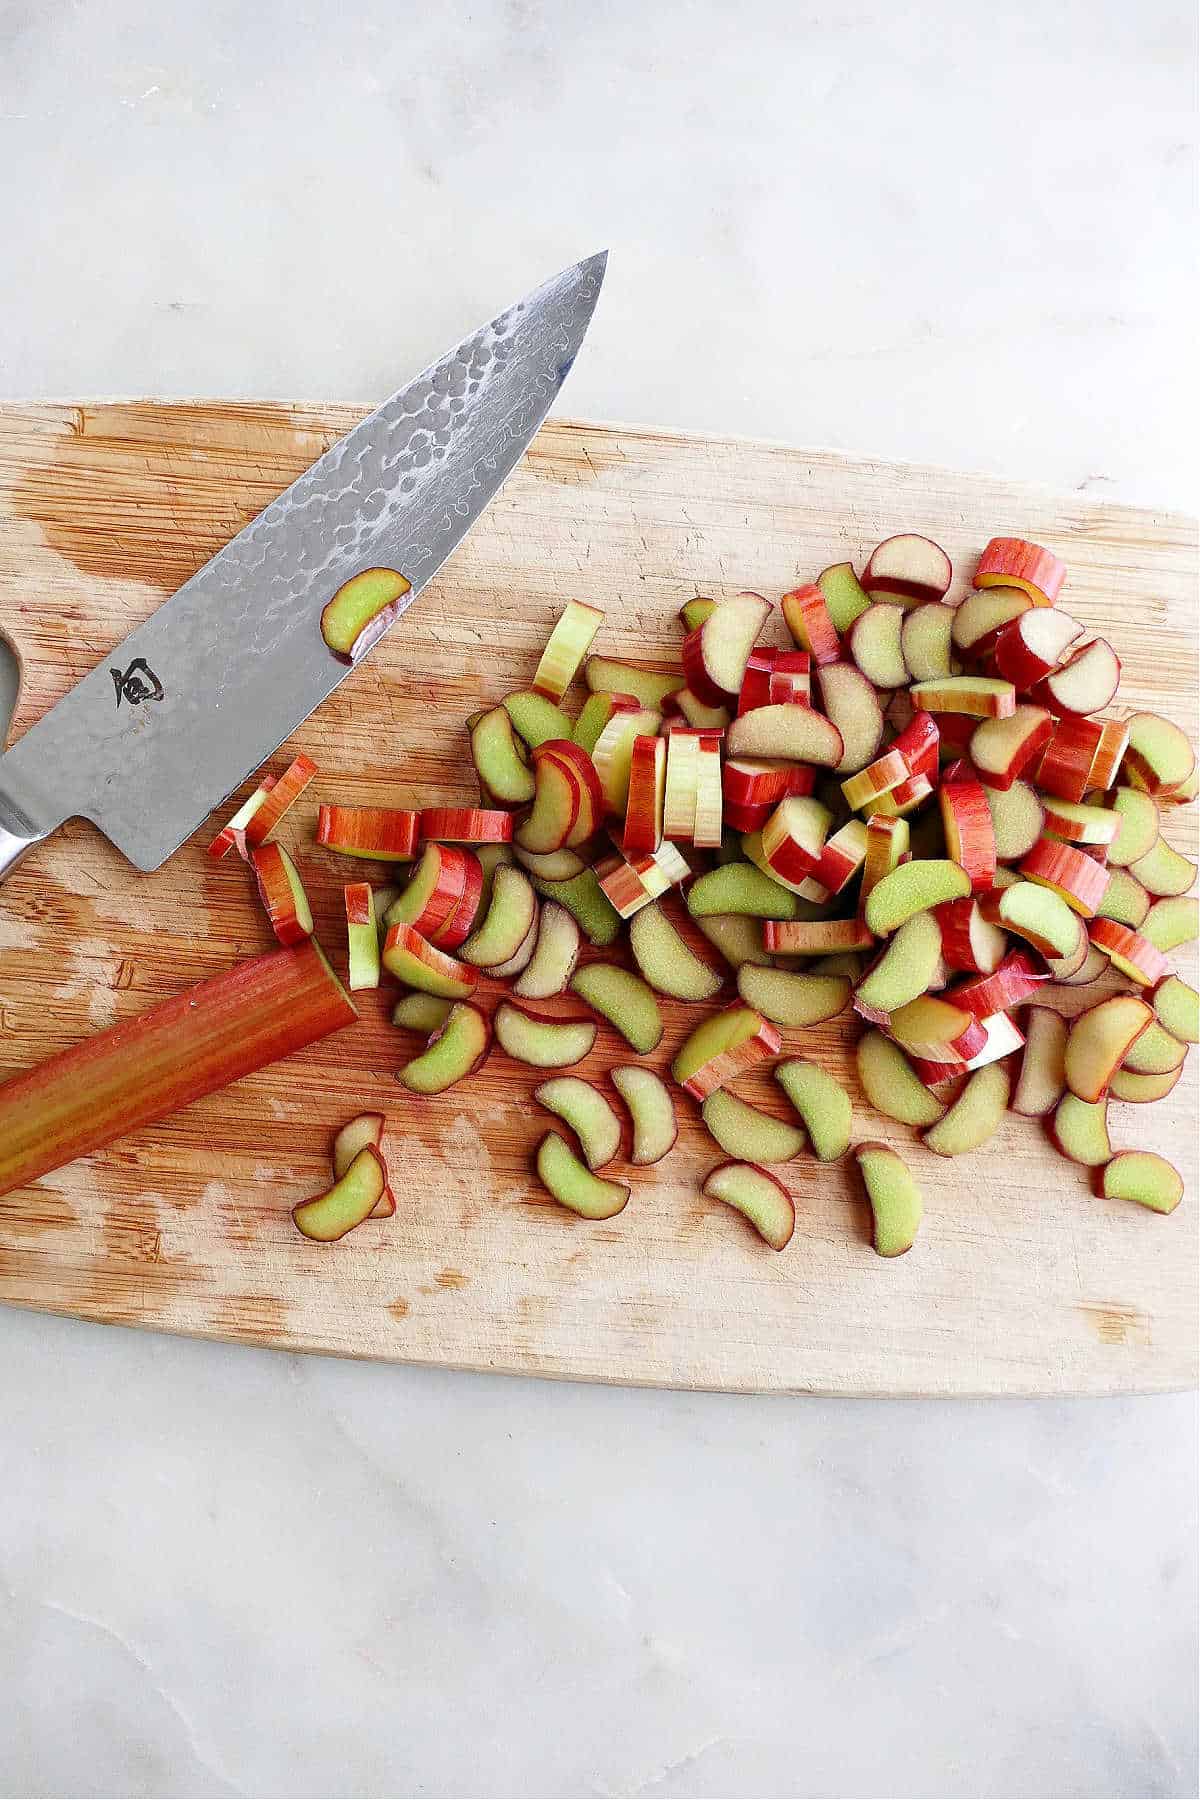 diced rhubarb on a bamboo cutting board next to a chef's knife